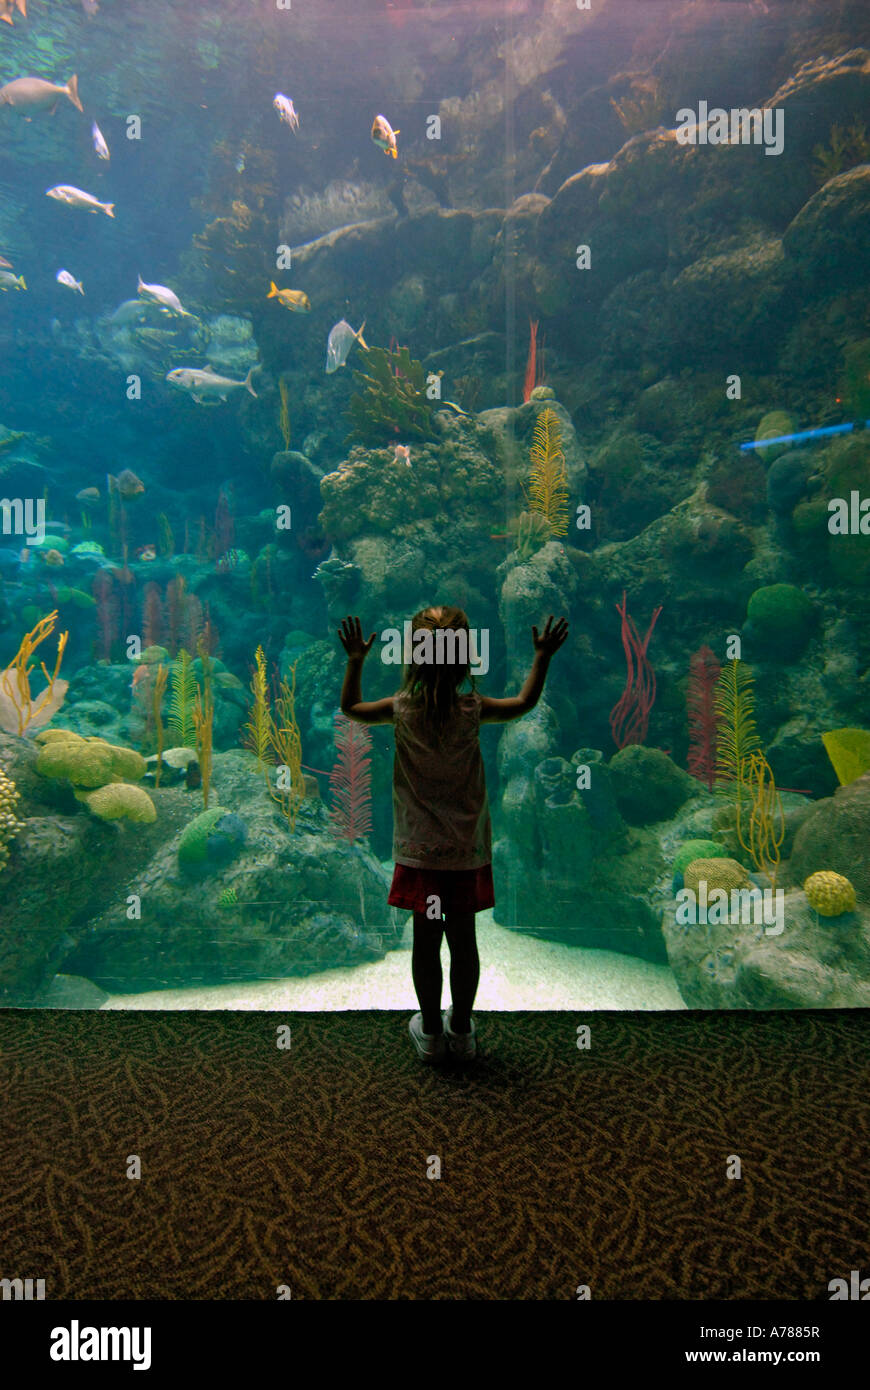 Child touches the glass in amazement at the Florida Aquarium in Tampa Florida FL Stock Photo